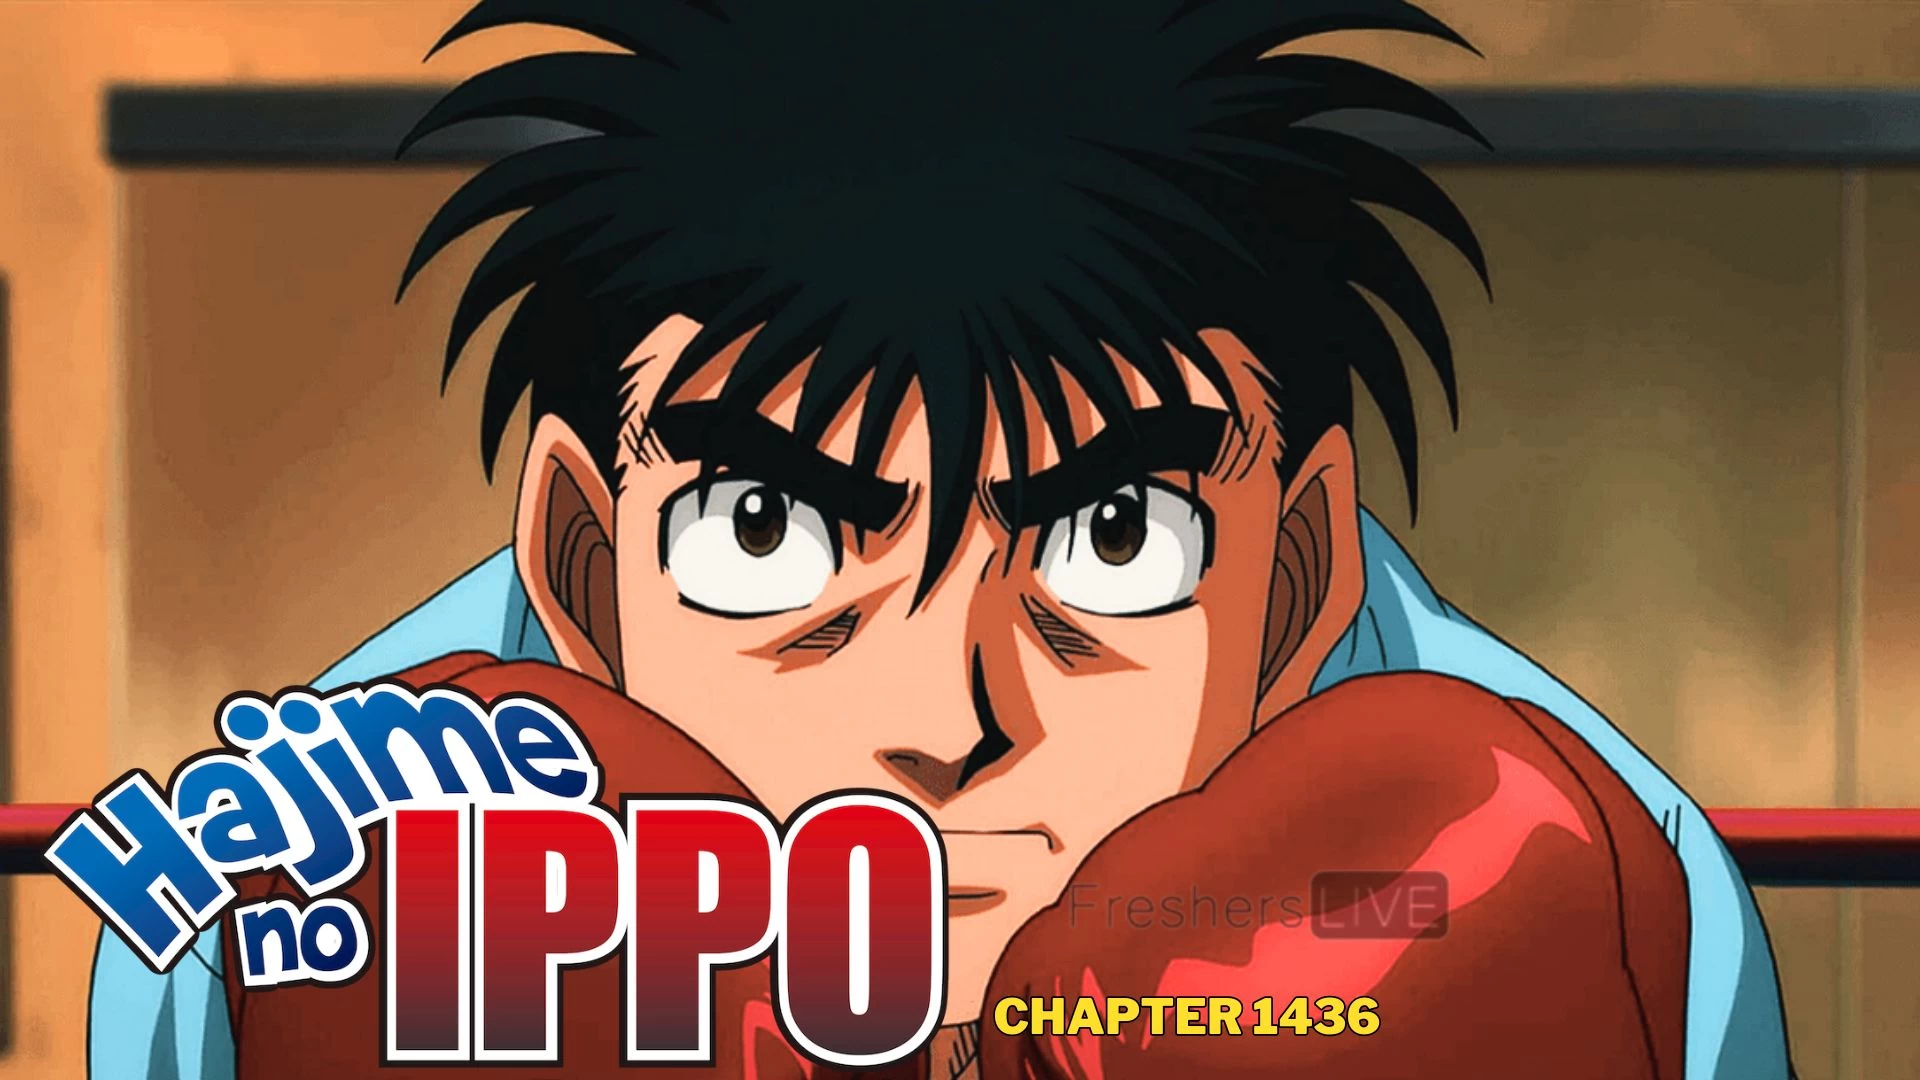 Hajime No Ippo Chapter 1436 Spoiler, Release Date, Raw Scan, Countdown and More